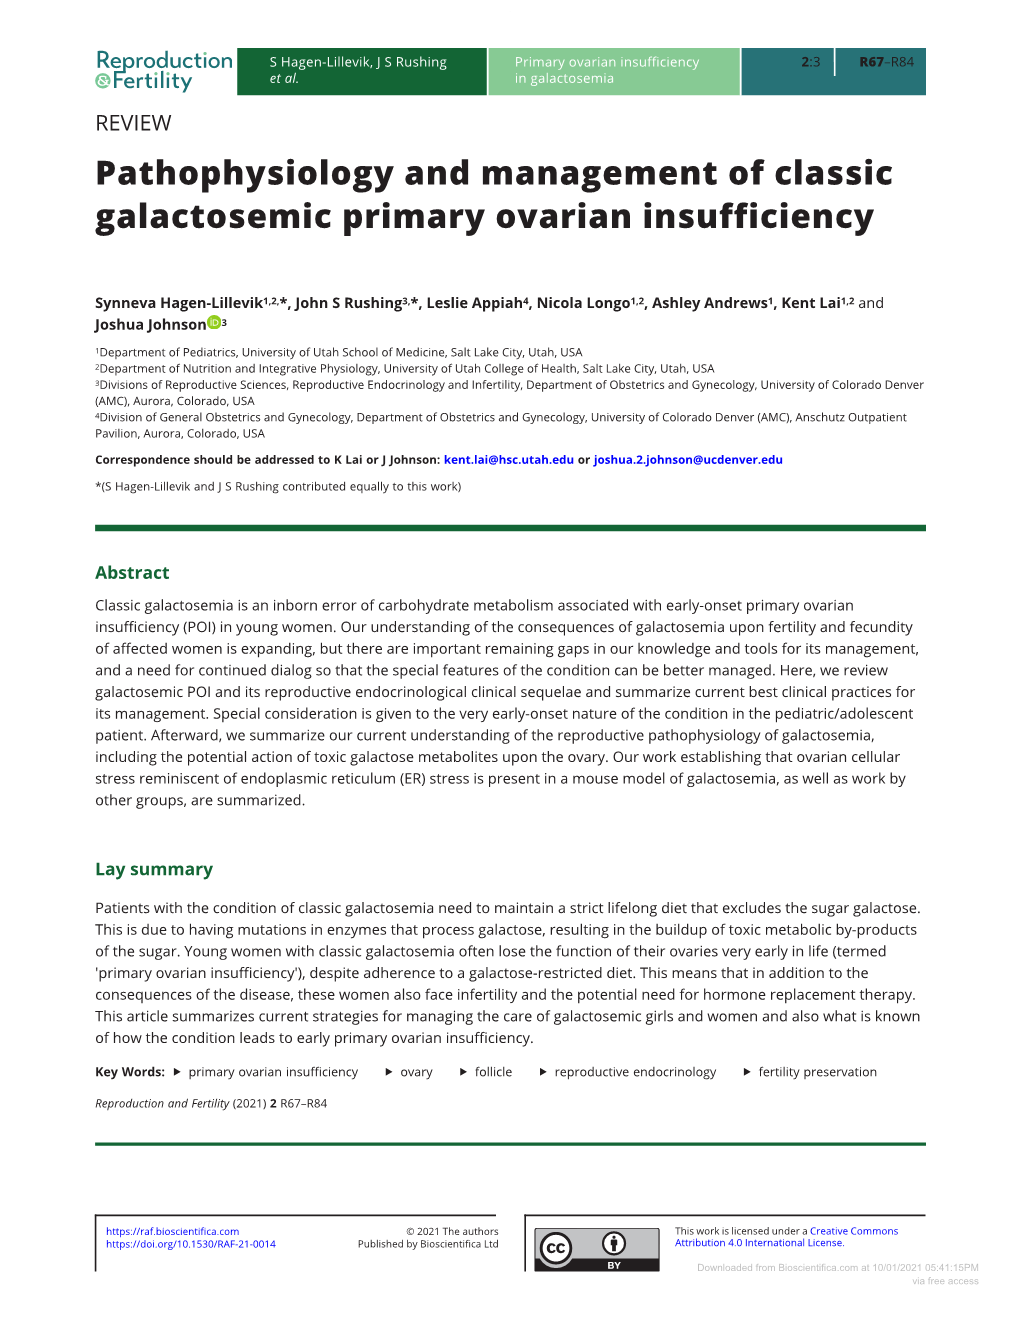 Pathophysiology and Management of Classic Galactosemic Primary Ovarian Insufficiency